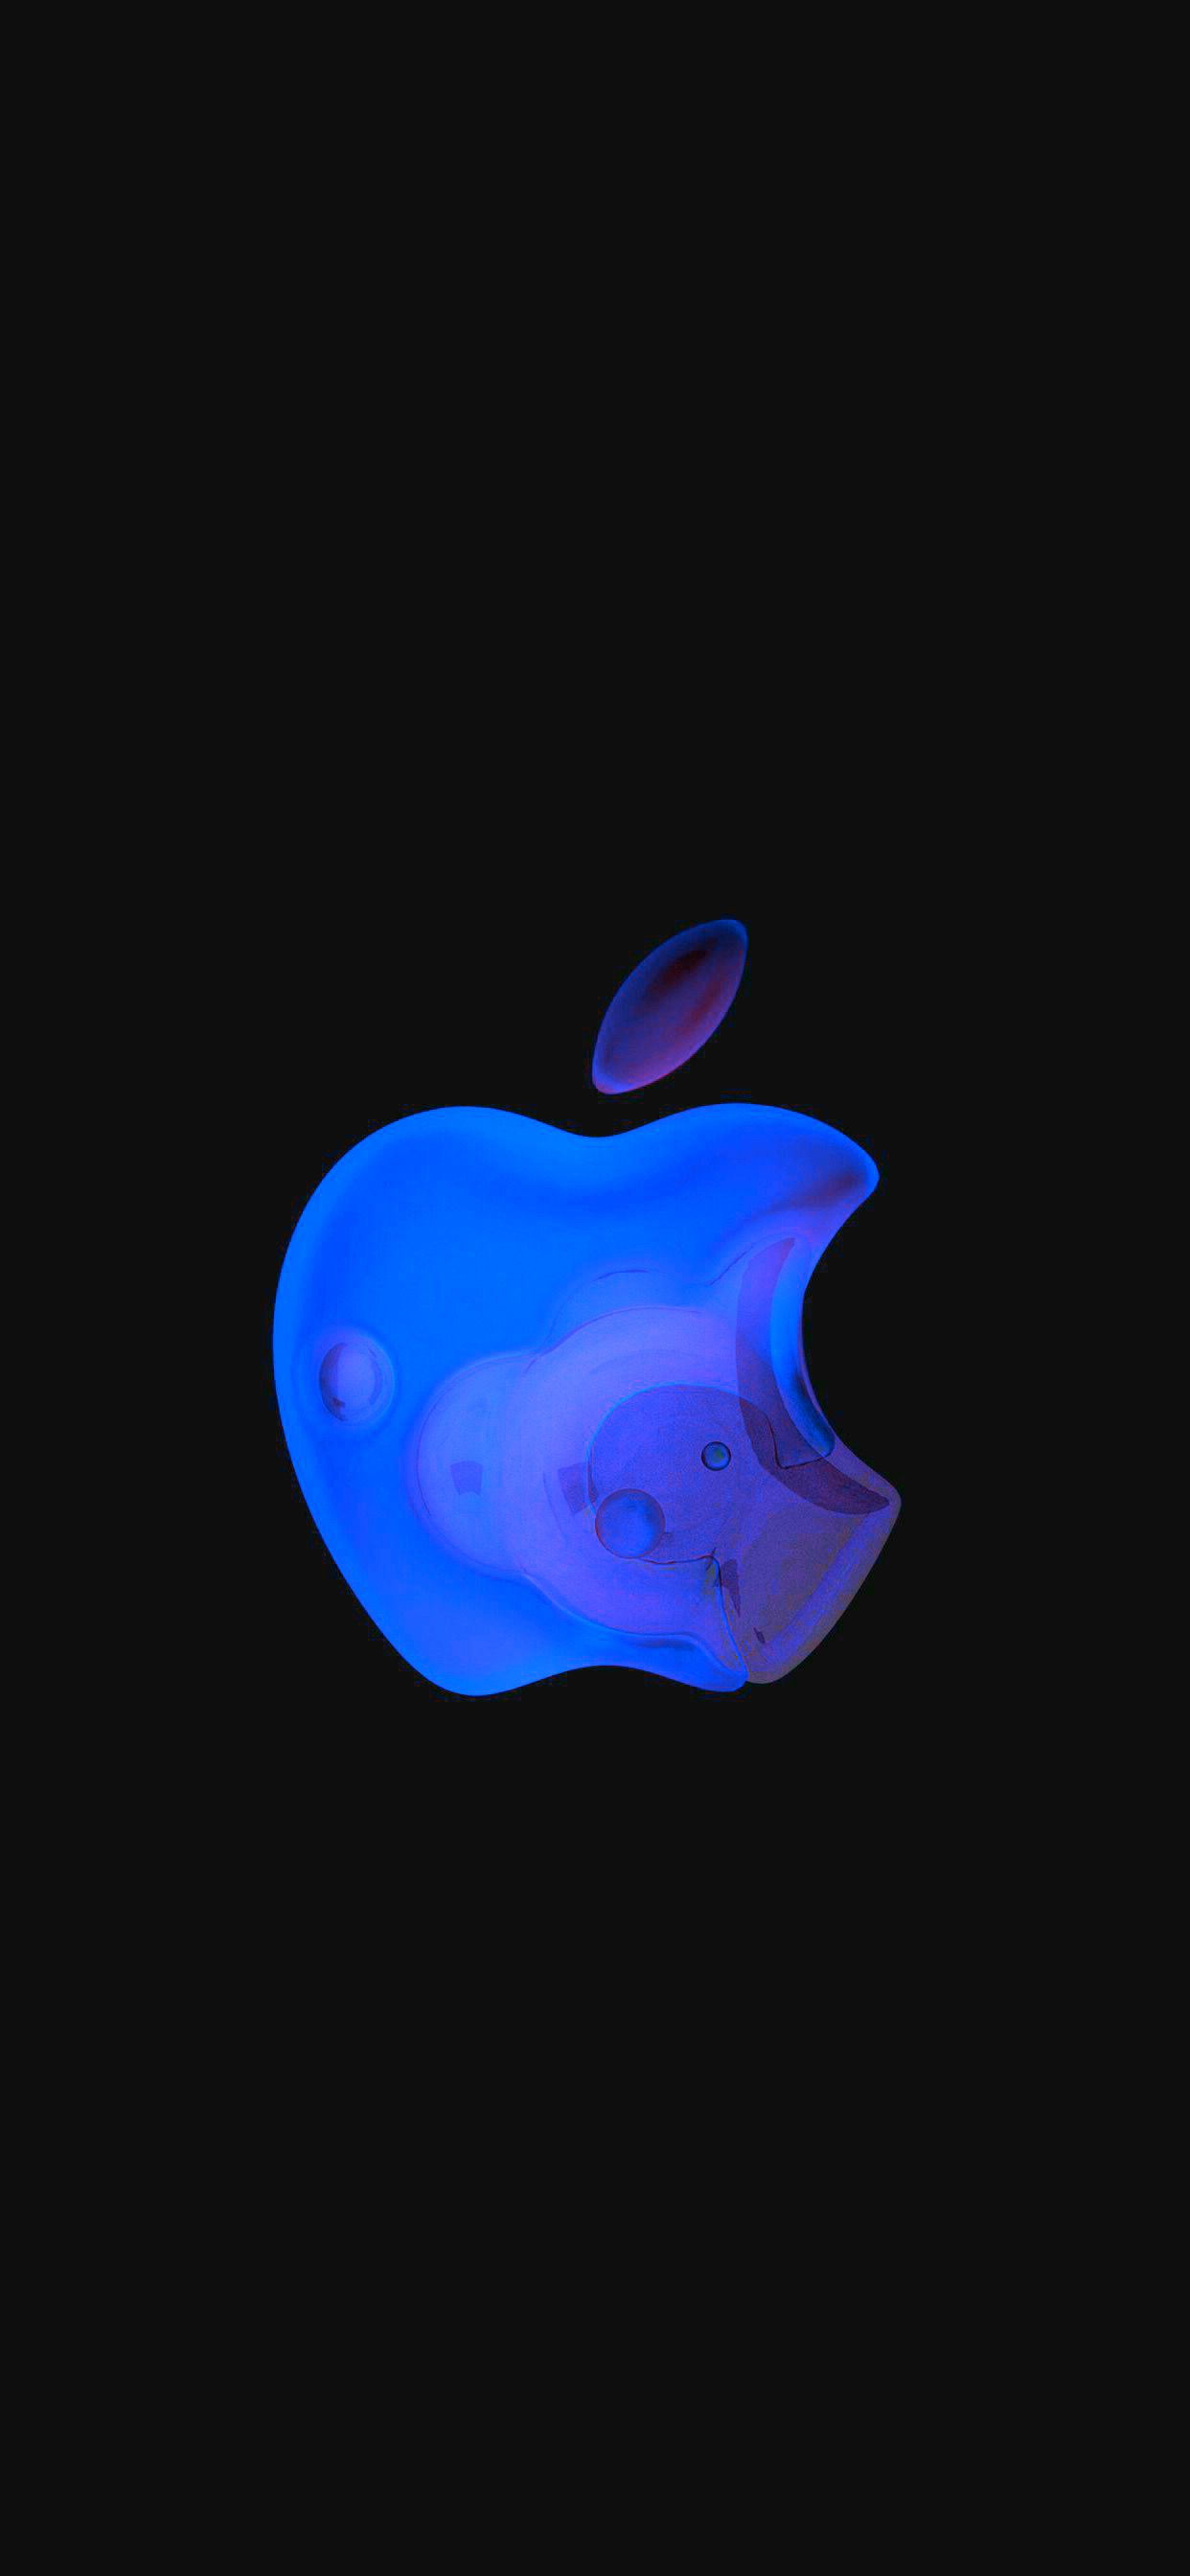 Apple Logo iPhone 11 Pro Max Wallpapers - Wallpaper Cave